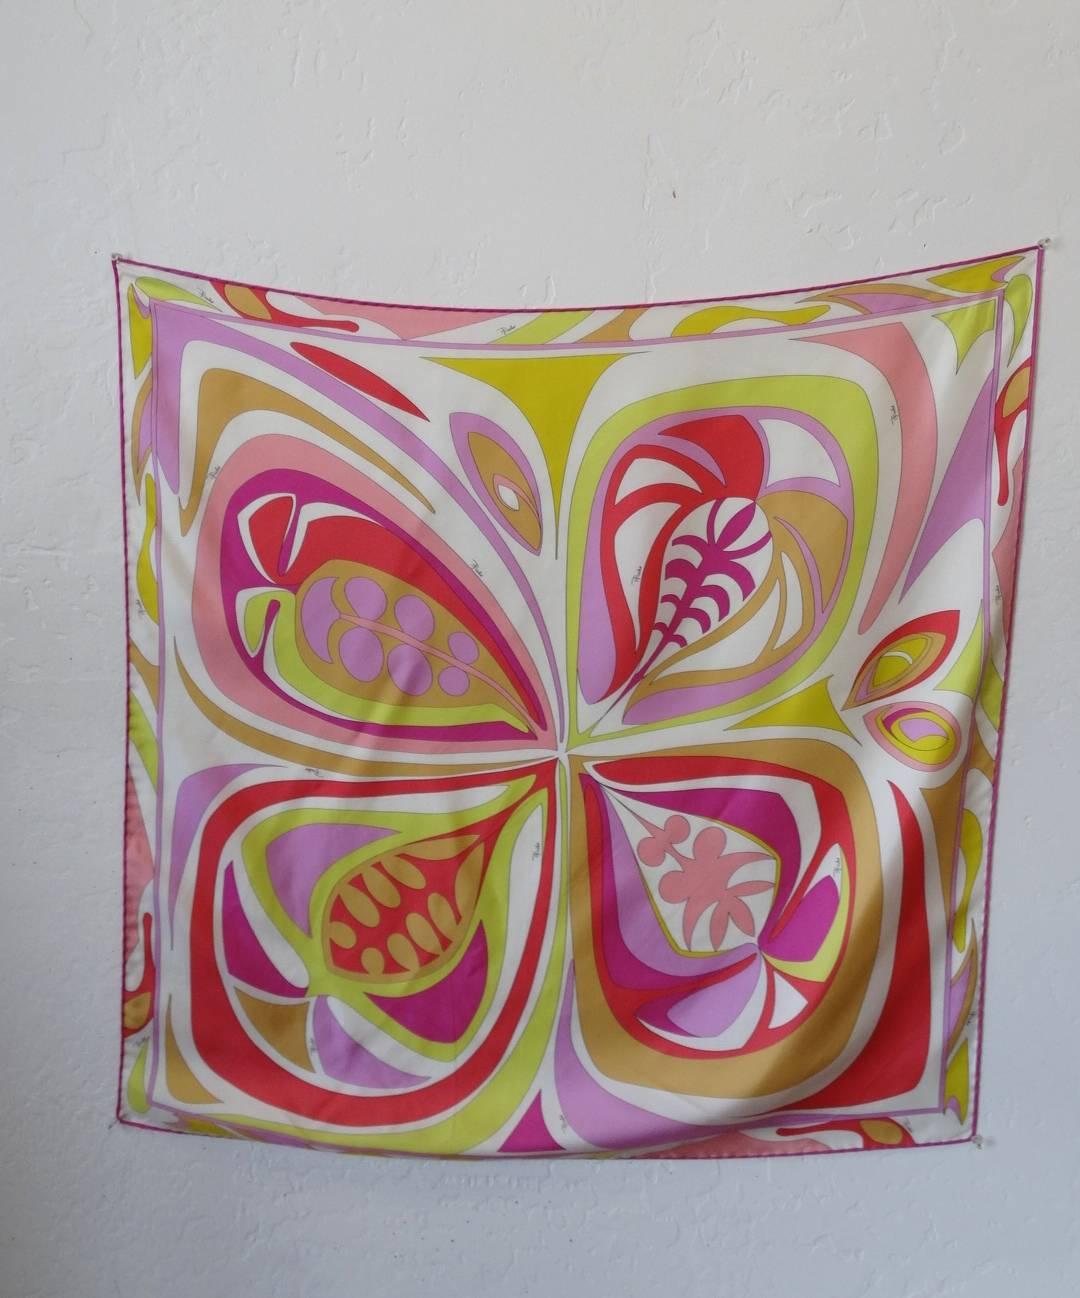 2000s era swirl scarf from none other than: Pucci! Large square silk scarf printed with an intricate clover inspired psychedelic print in shades of pink, lavender, coral and chartreuse. This piece is versatile! Wear as a headscarf, wrap around your